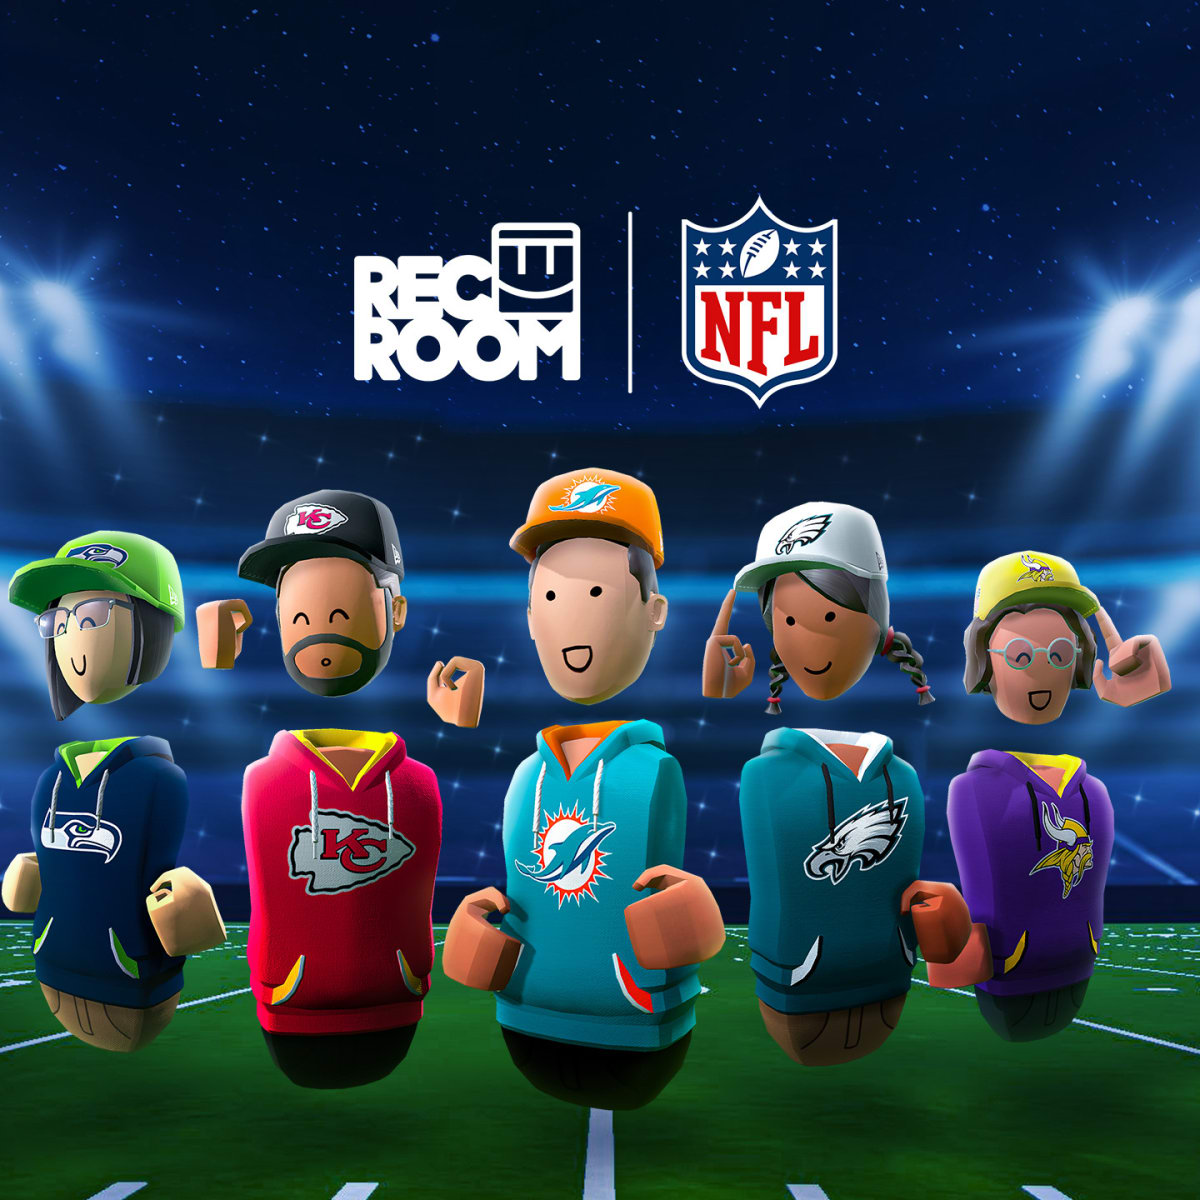 NFL and Rec Room partner up for virtual fan experience